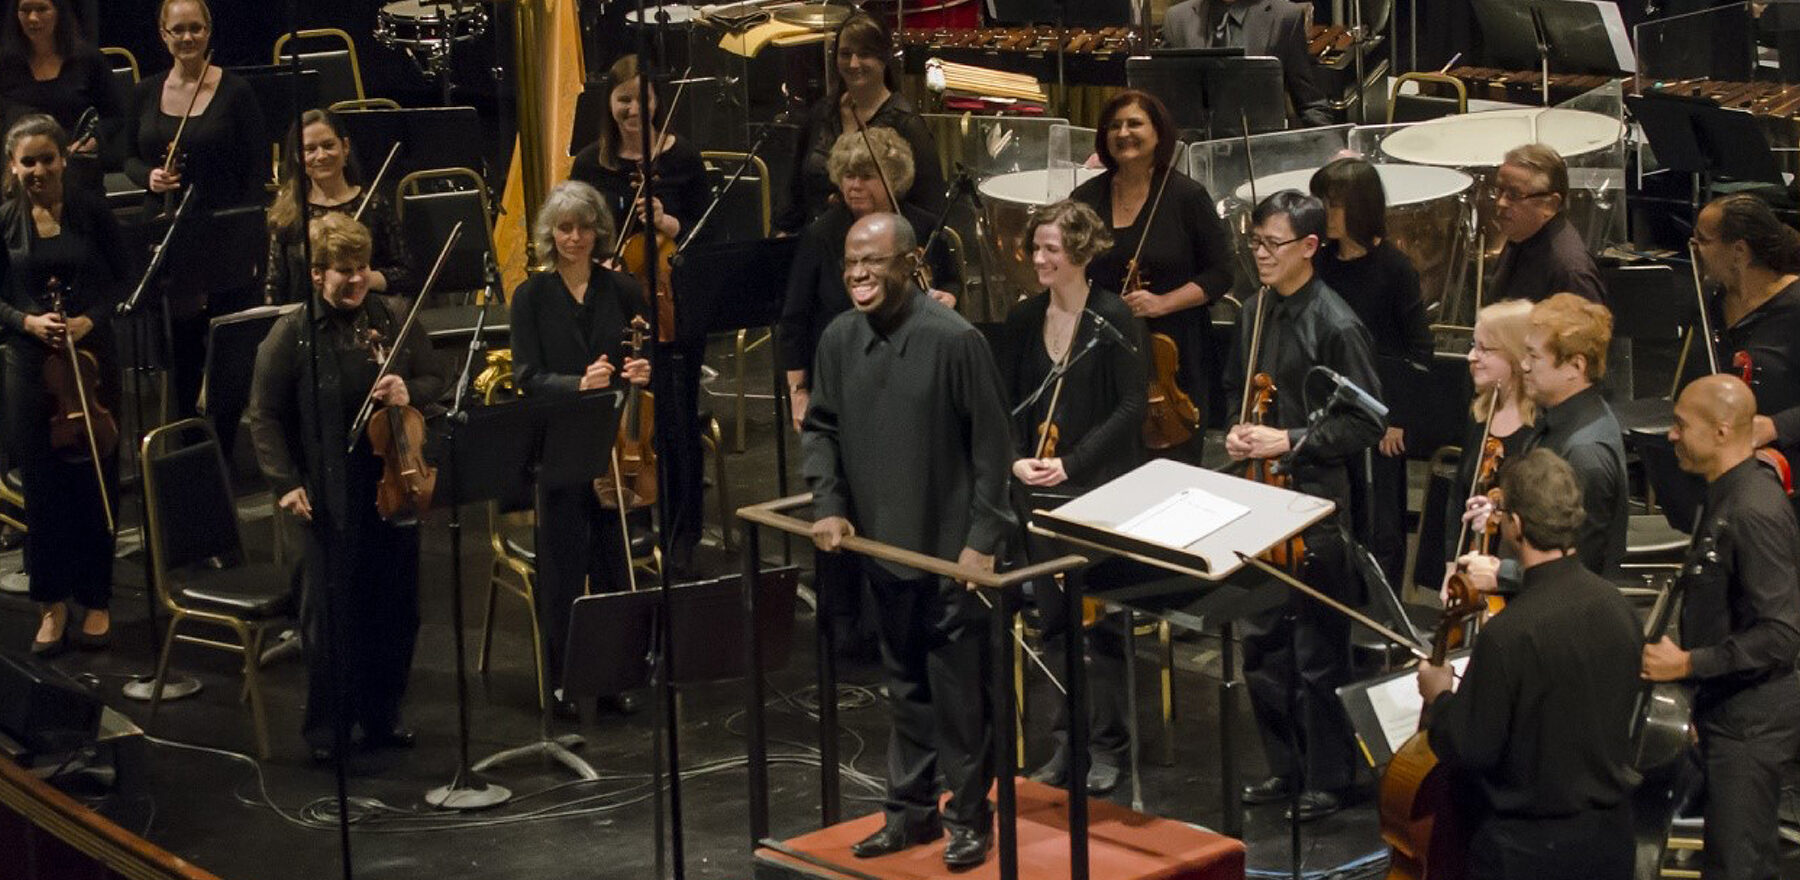 Michael Morgan standing on stage with the Oakland Symphony Orchestra